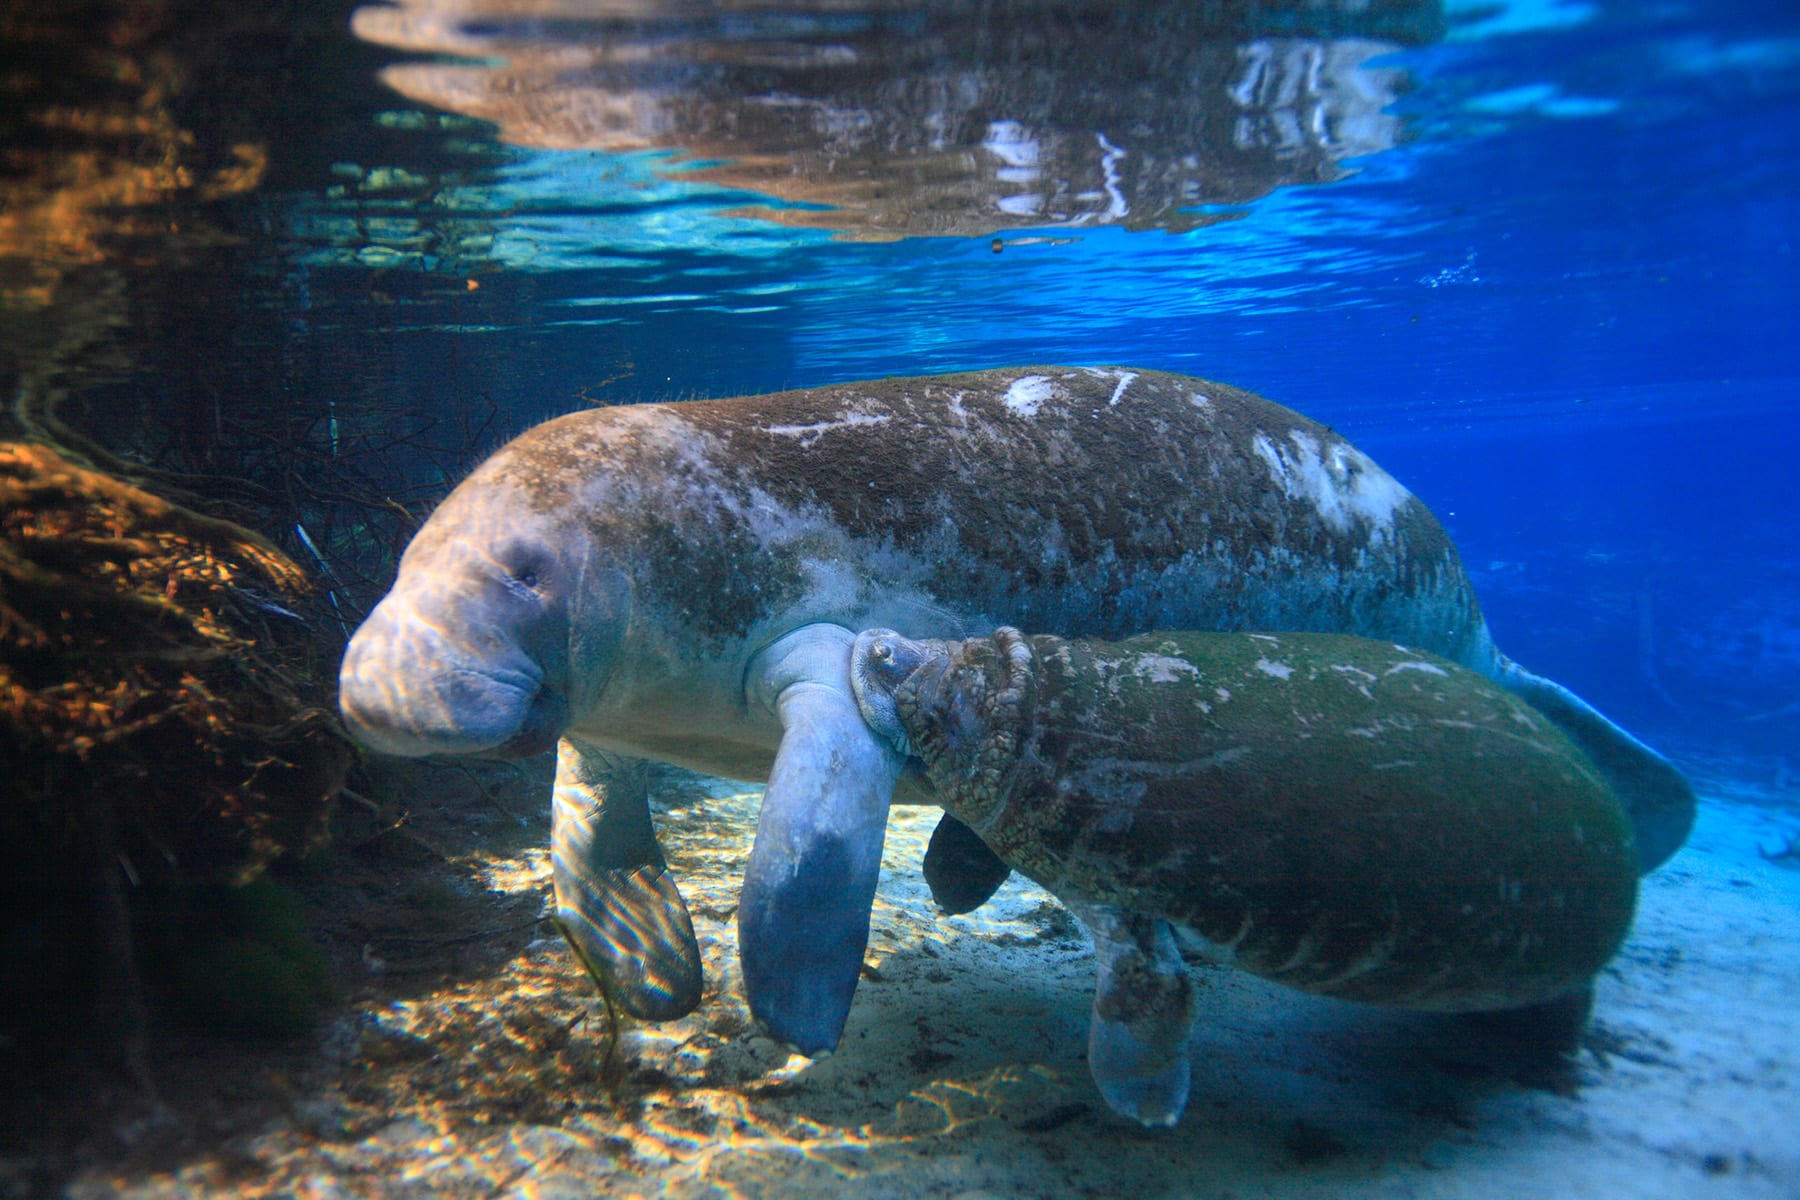 A manatee calf nursing from its mother.